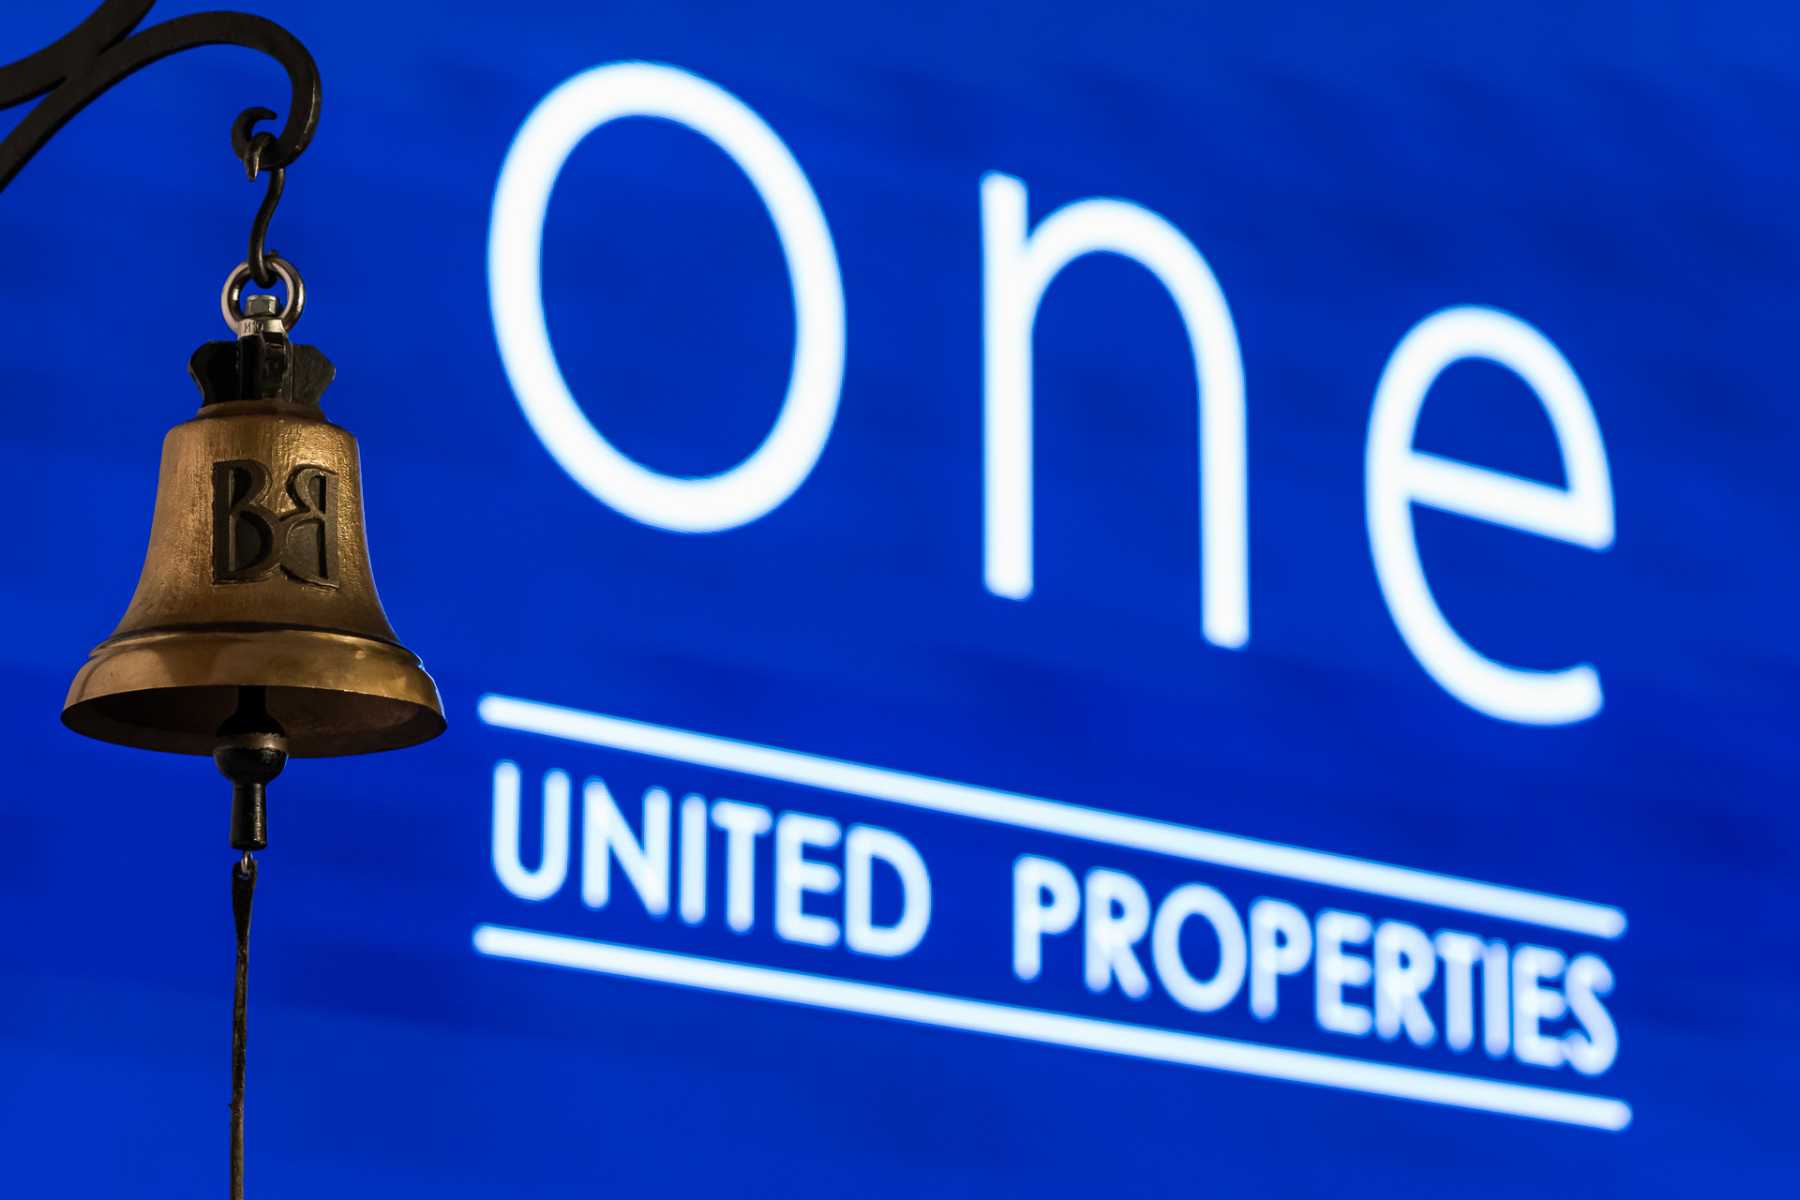 One United Properties posts a consolidated turnover of 171 million euros and a gross profit of 69.8 million euros in H1 2023